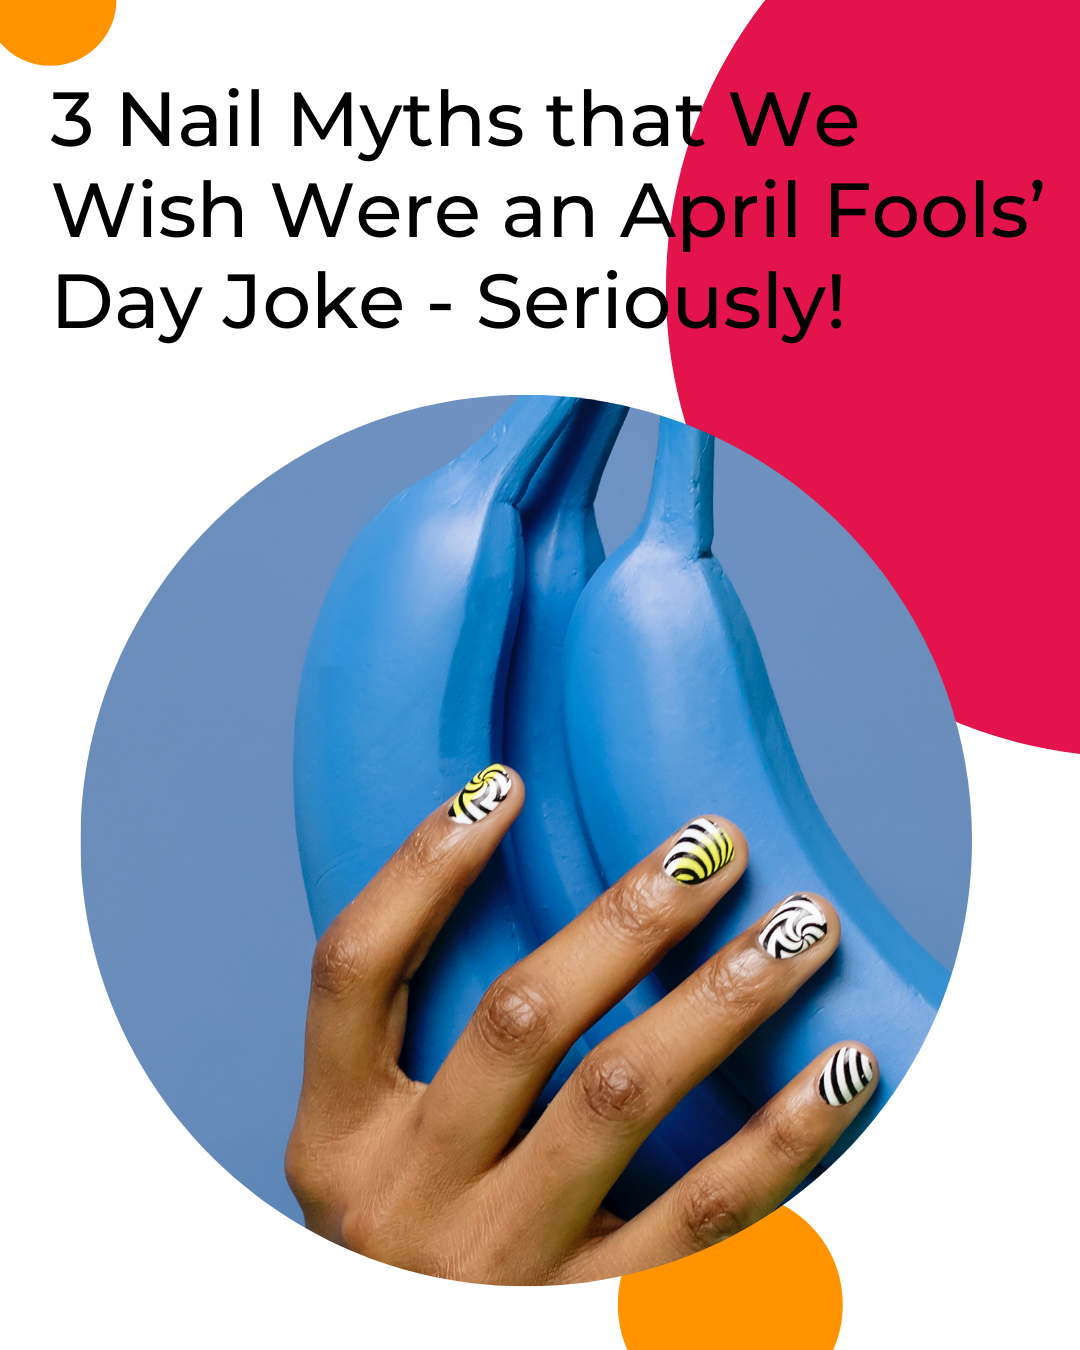 3 Nail Myths that We Wish Were an April Fools’ Day Joke - Seriously!